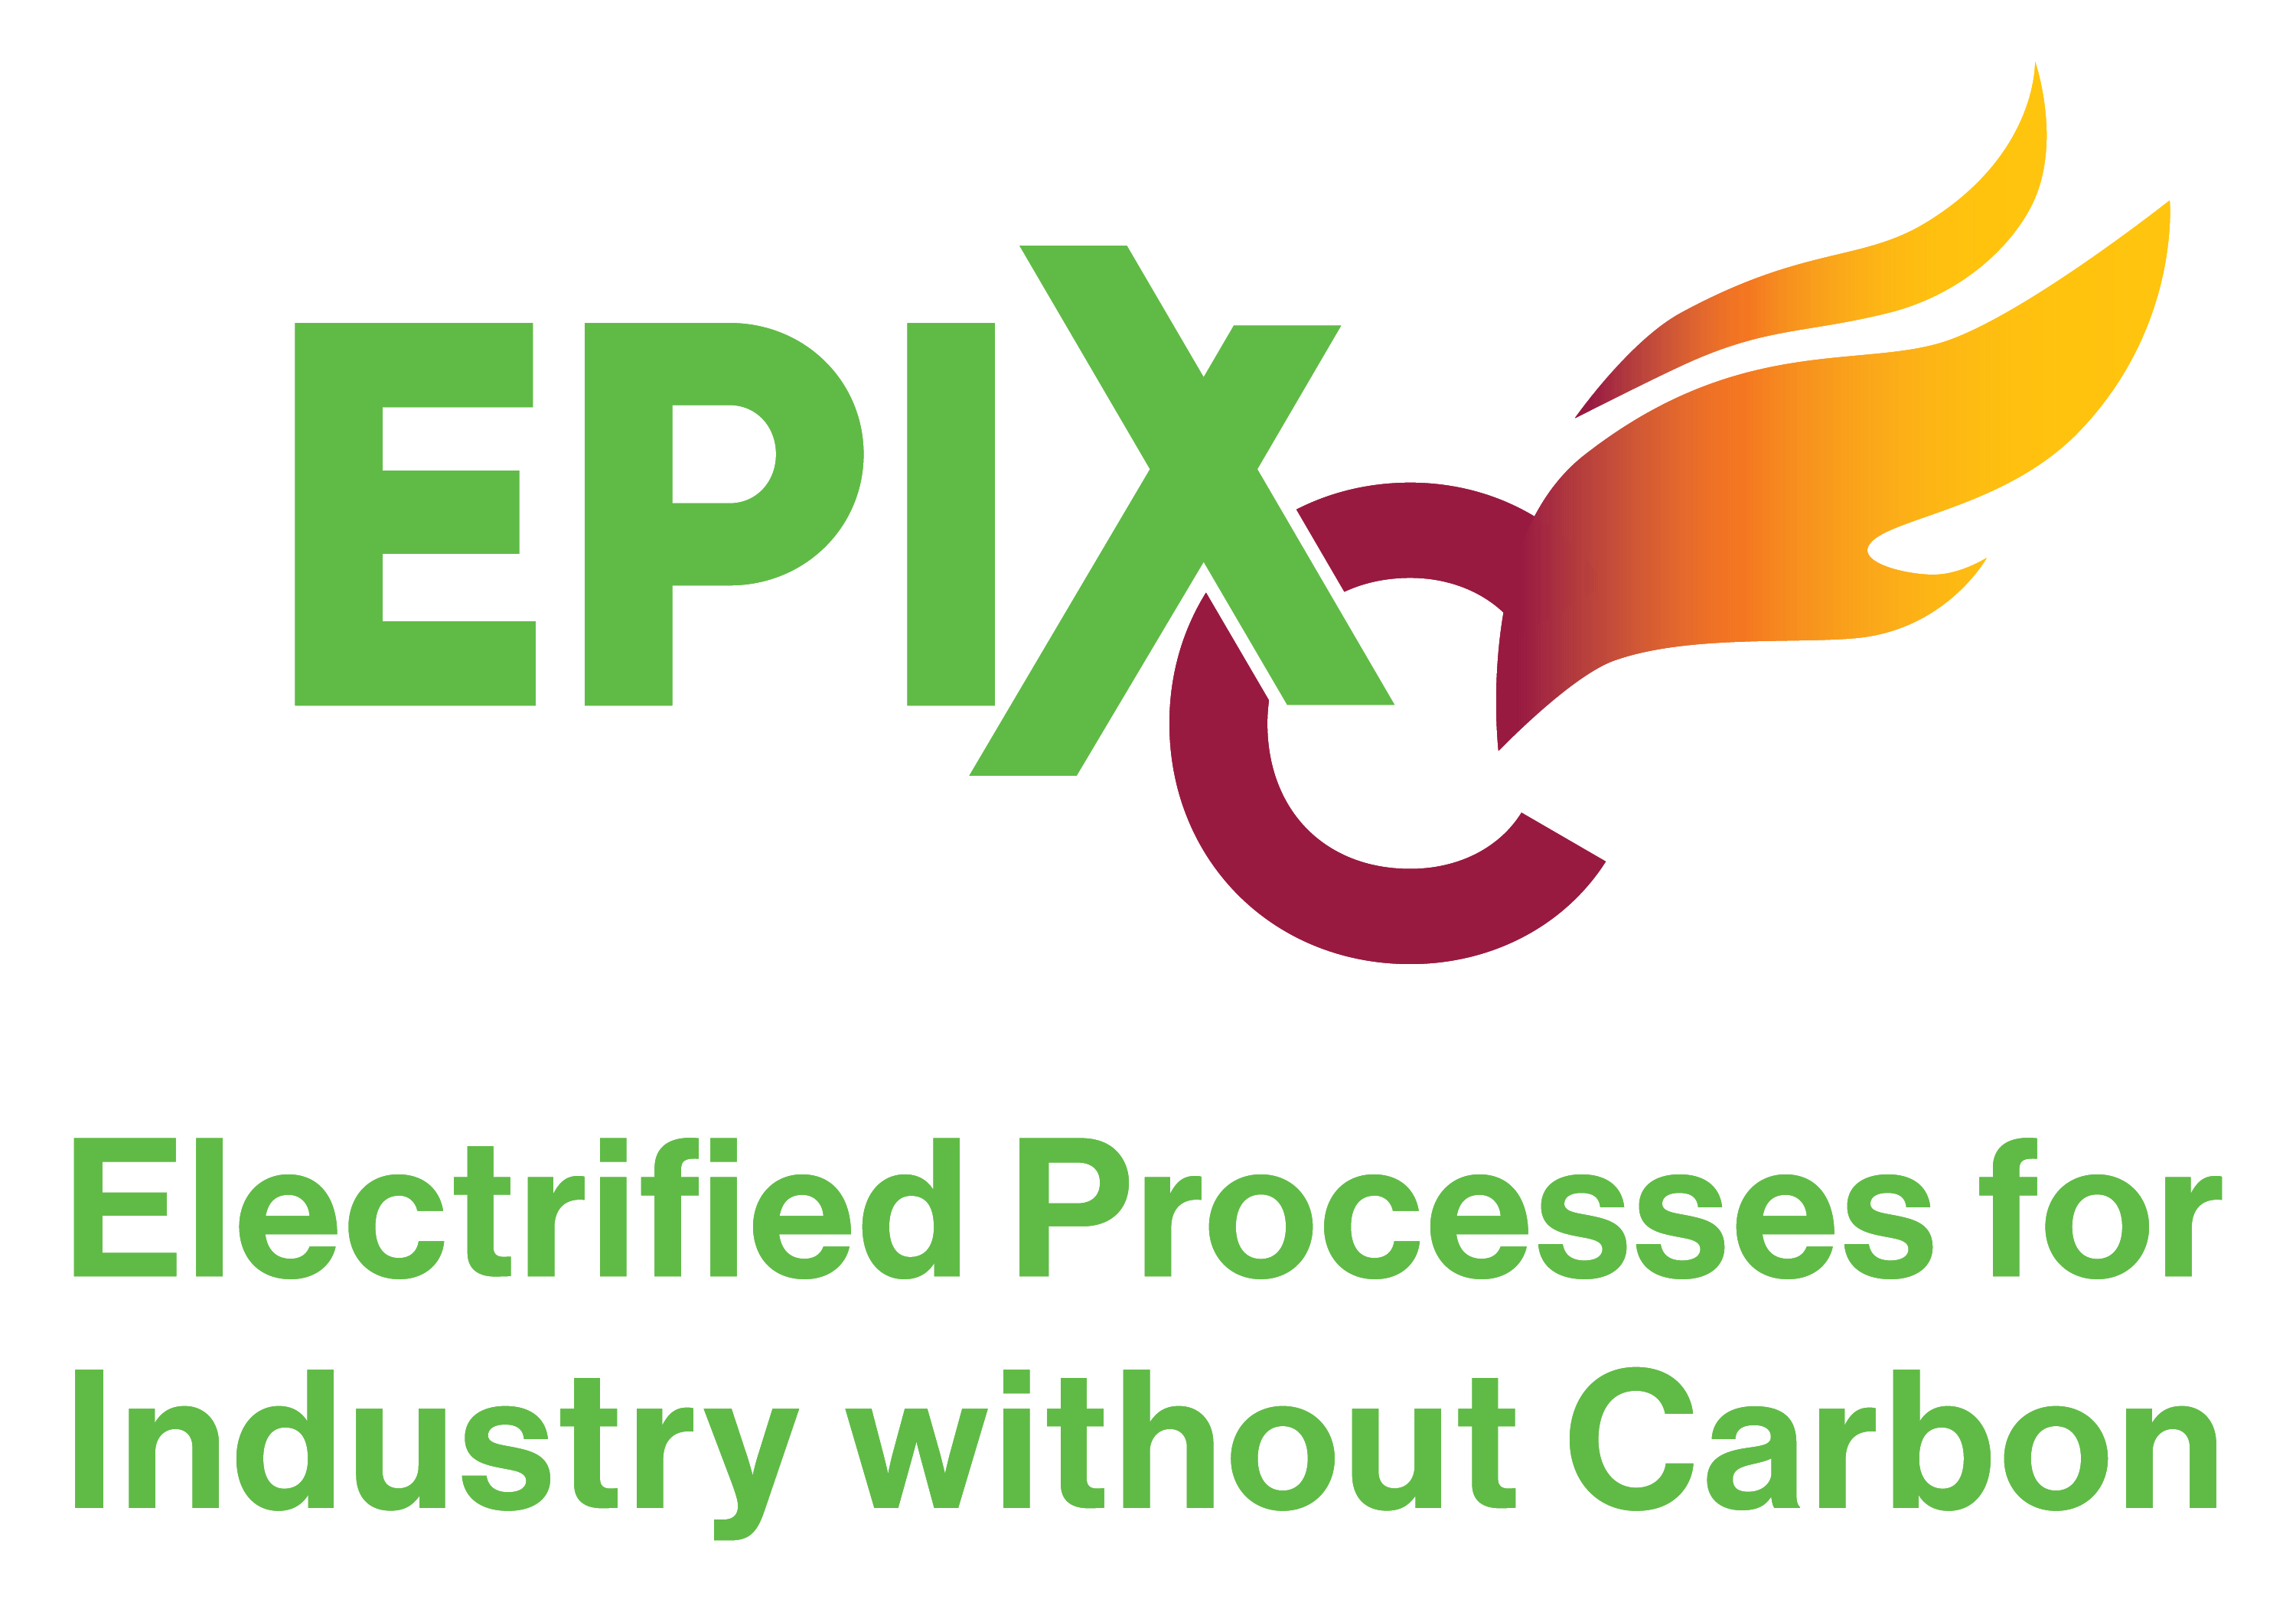 EPIXC Electrified Processes for Industry without Carbon logo